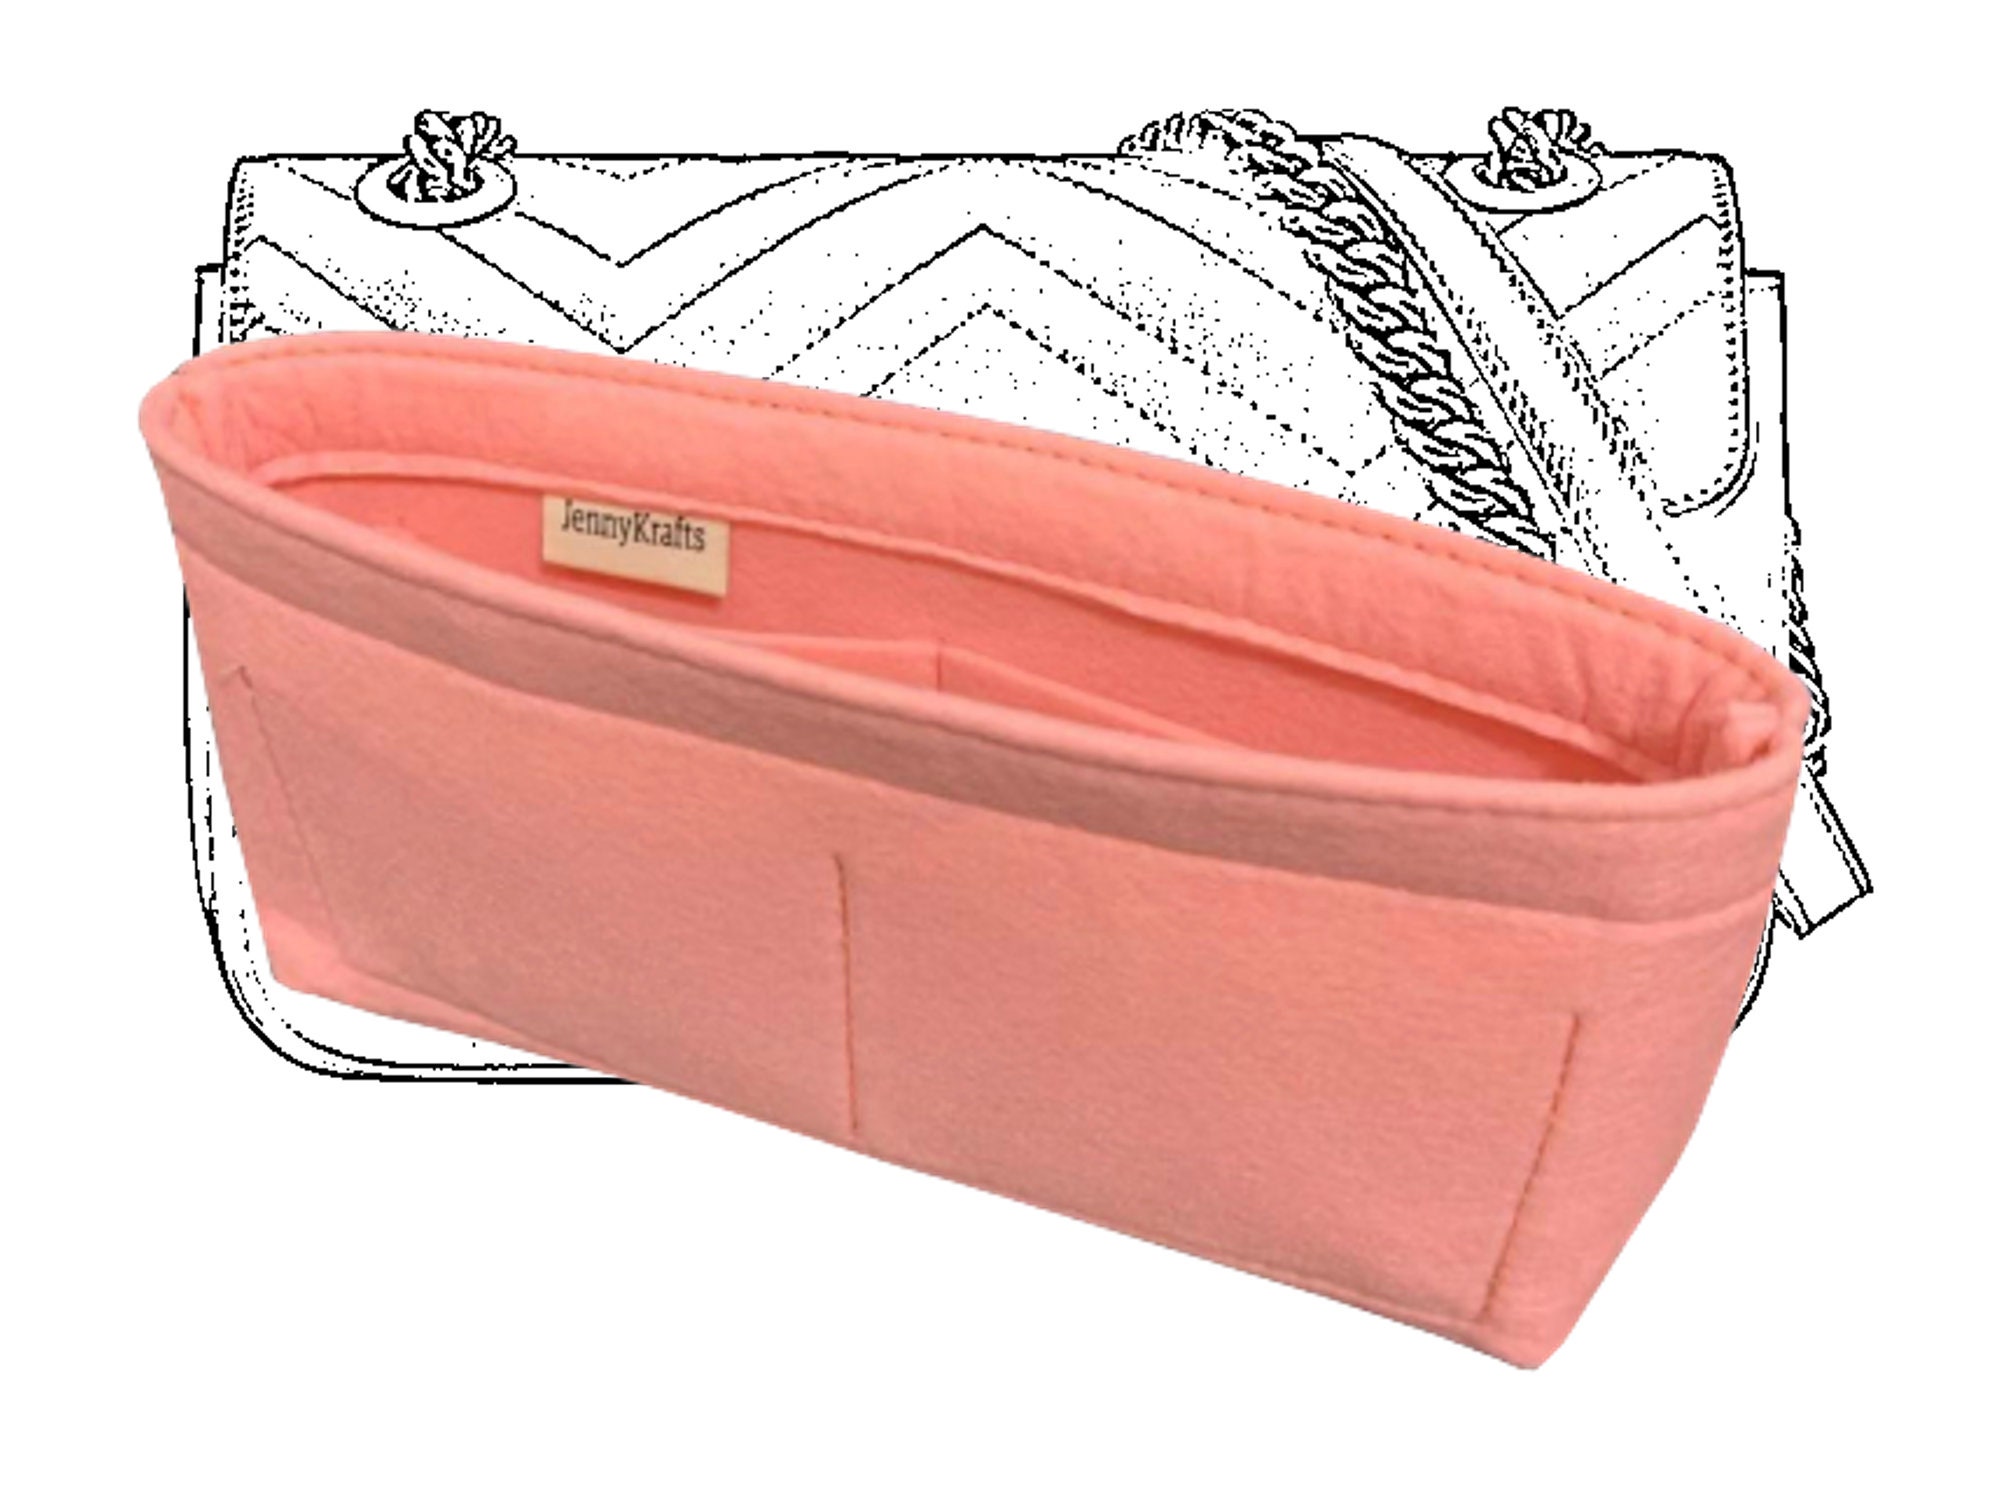 For [KIRIGAMI POCHETTE Spring Collection] (3-in-1 pouch) Felt Insert  Organizer with Shoulder Strap Chain Covert to Crossbody Bag - JennyKrafts